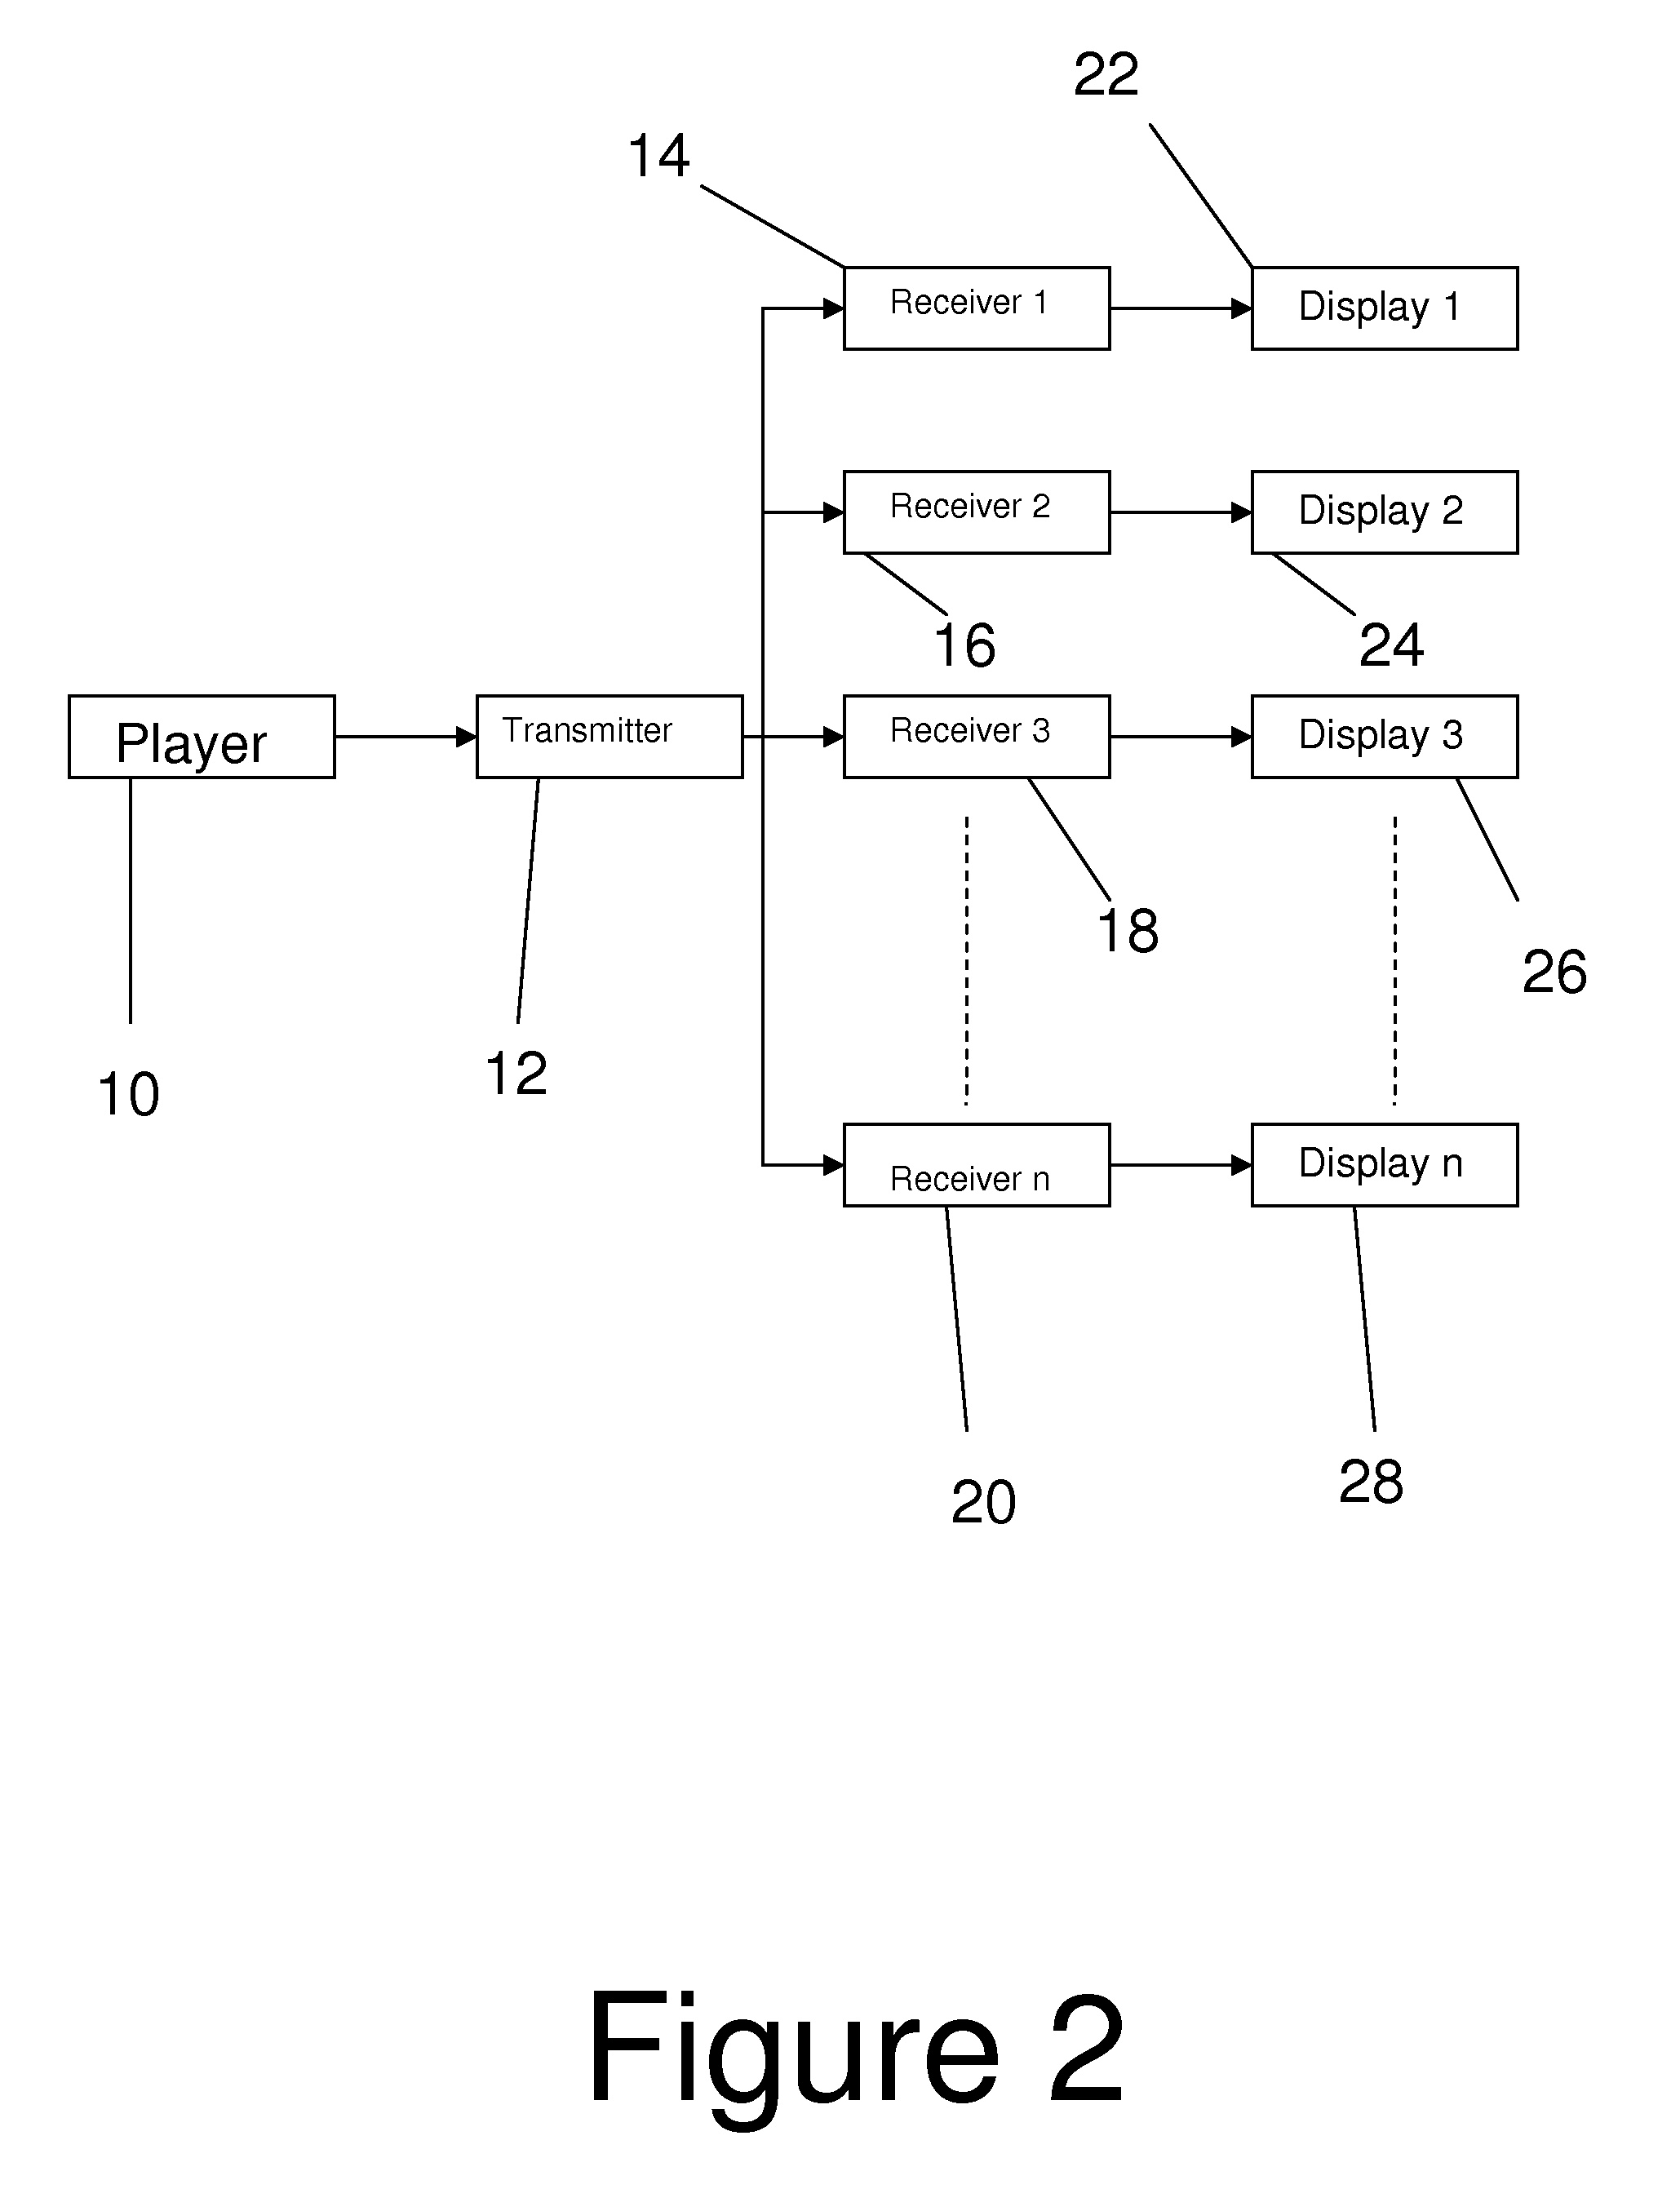 System for supplying varying content to multiple displays using a single player